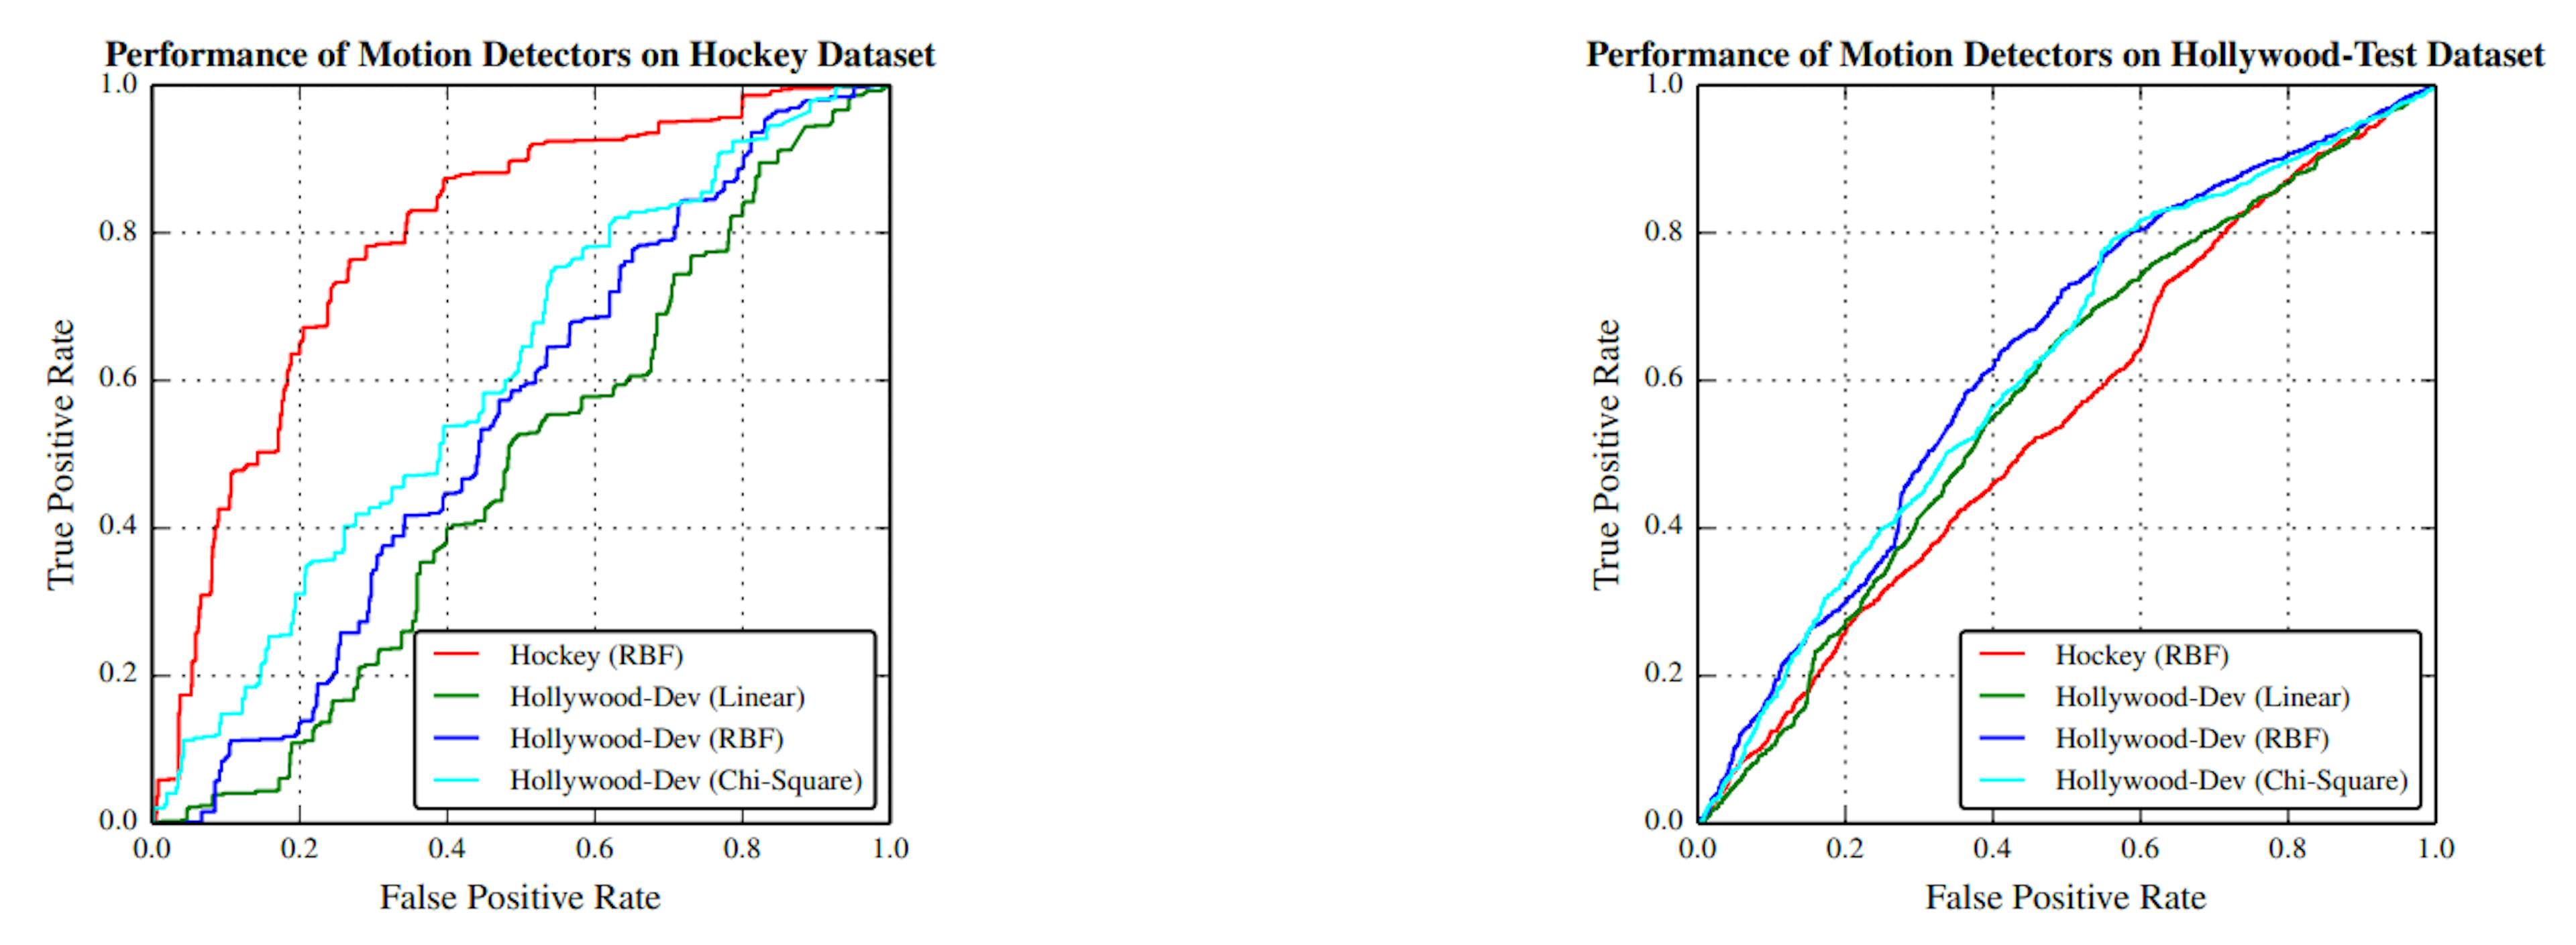 Figure 4.5: Performance of the Motion feature classifiers on Hockey and HollywoodTest Datasets. The red curve is for the classifier trained on the Hockey Dataset and the remaining three are for the three classifiers trained on Hollywood-Dev dataset with Linear, RBF and Chi-Square kernels.